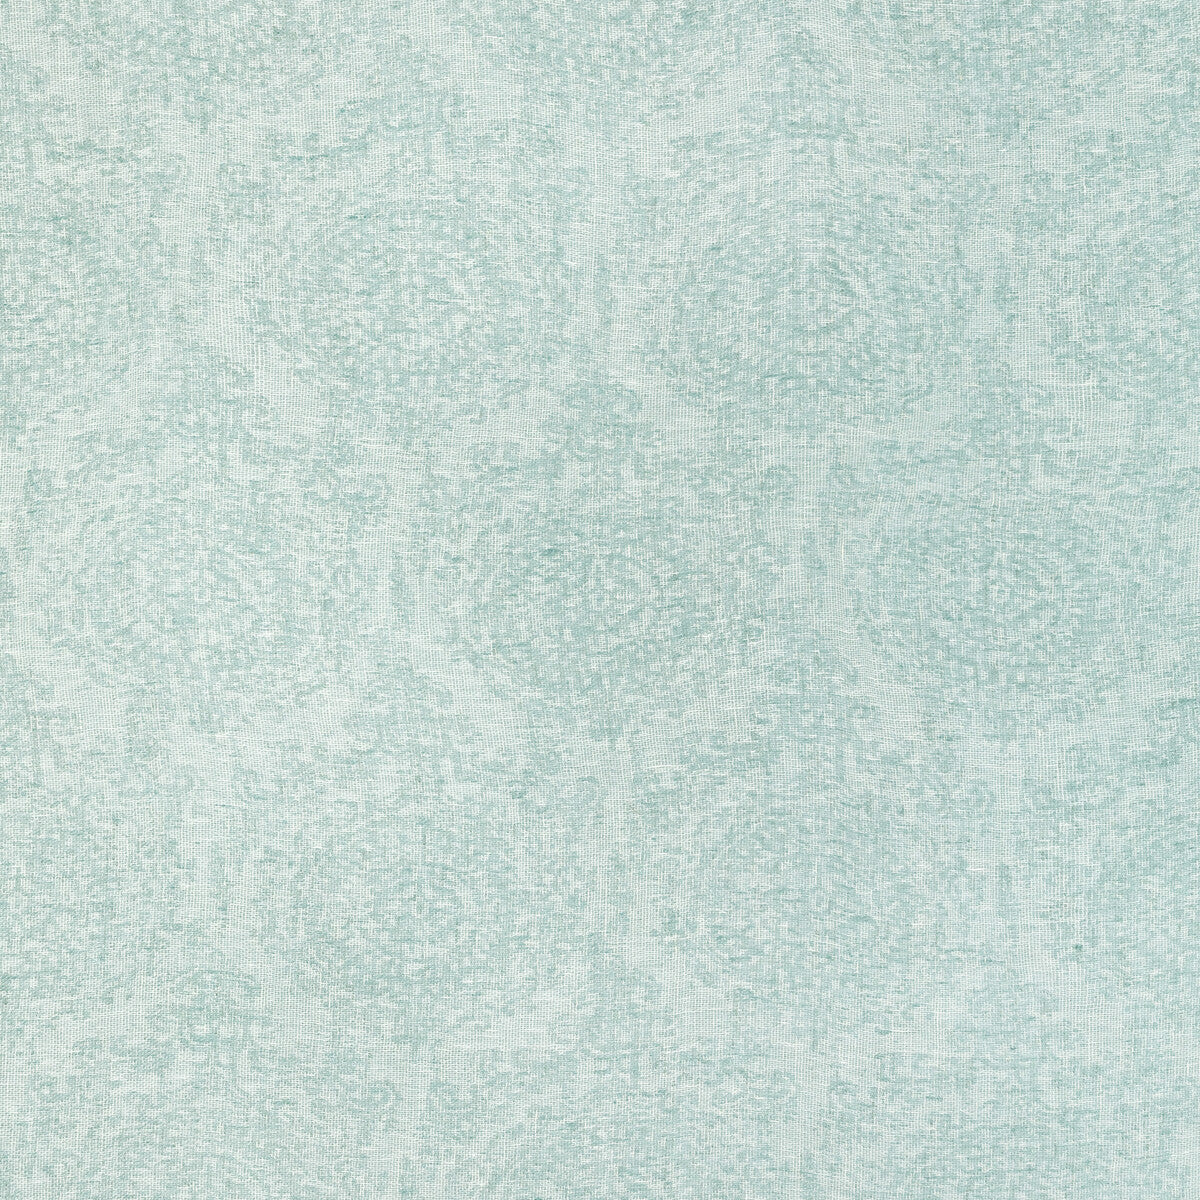 Romona Sheer fabric in aqua color - pattern 2021120.13.0 - by Lee Jofa in the Summerland collection